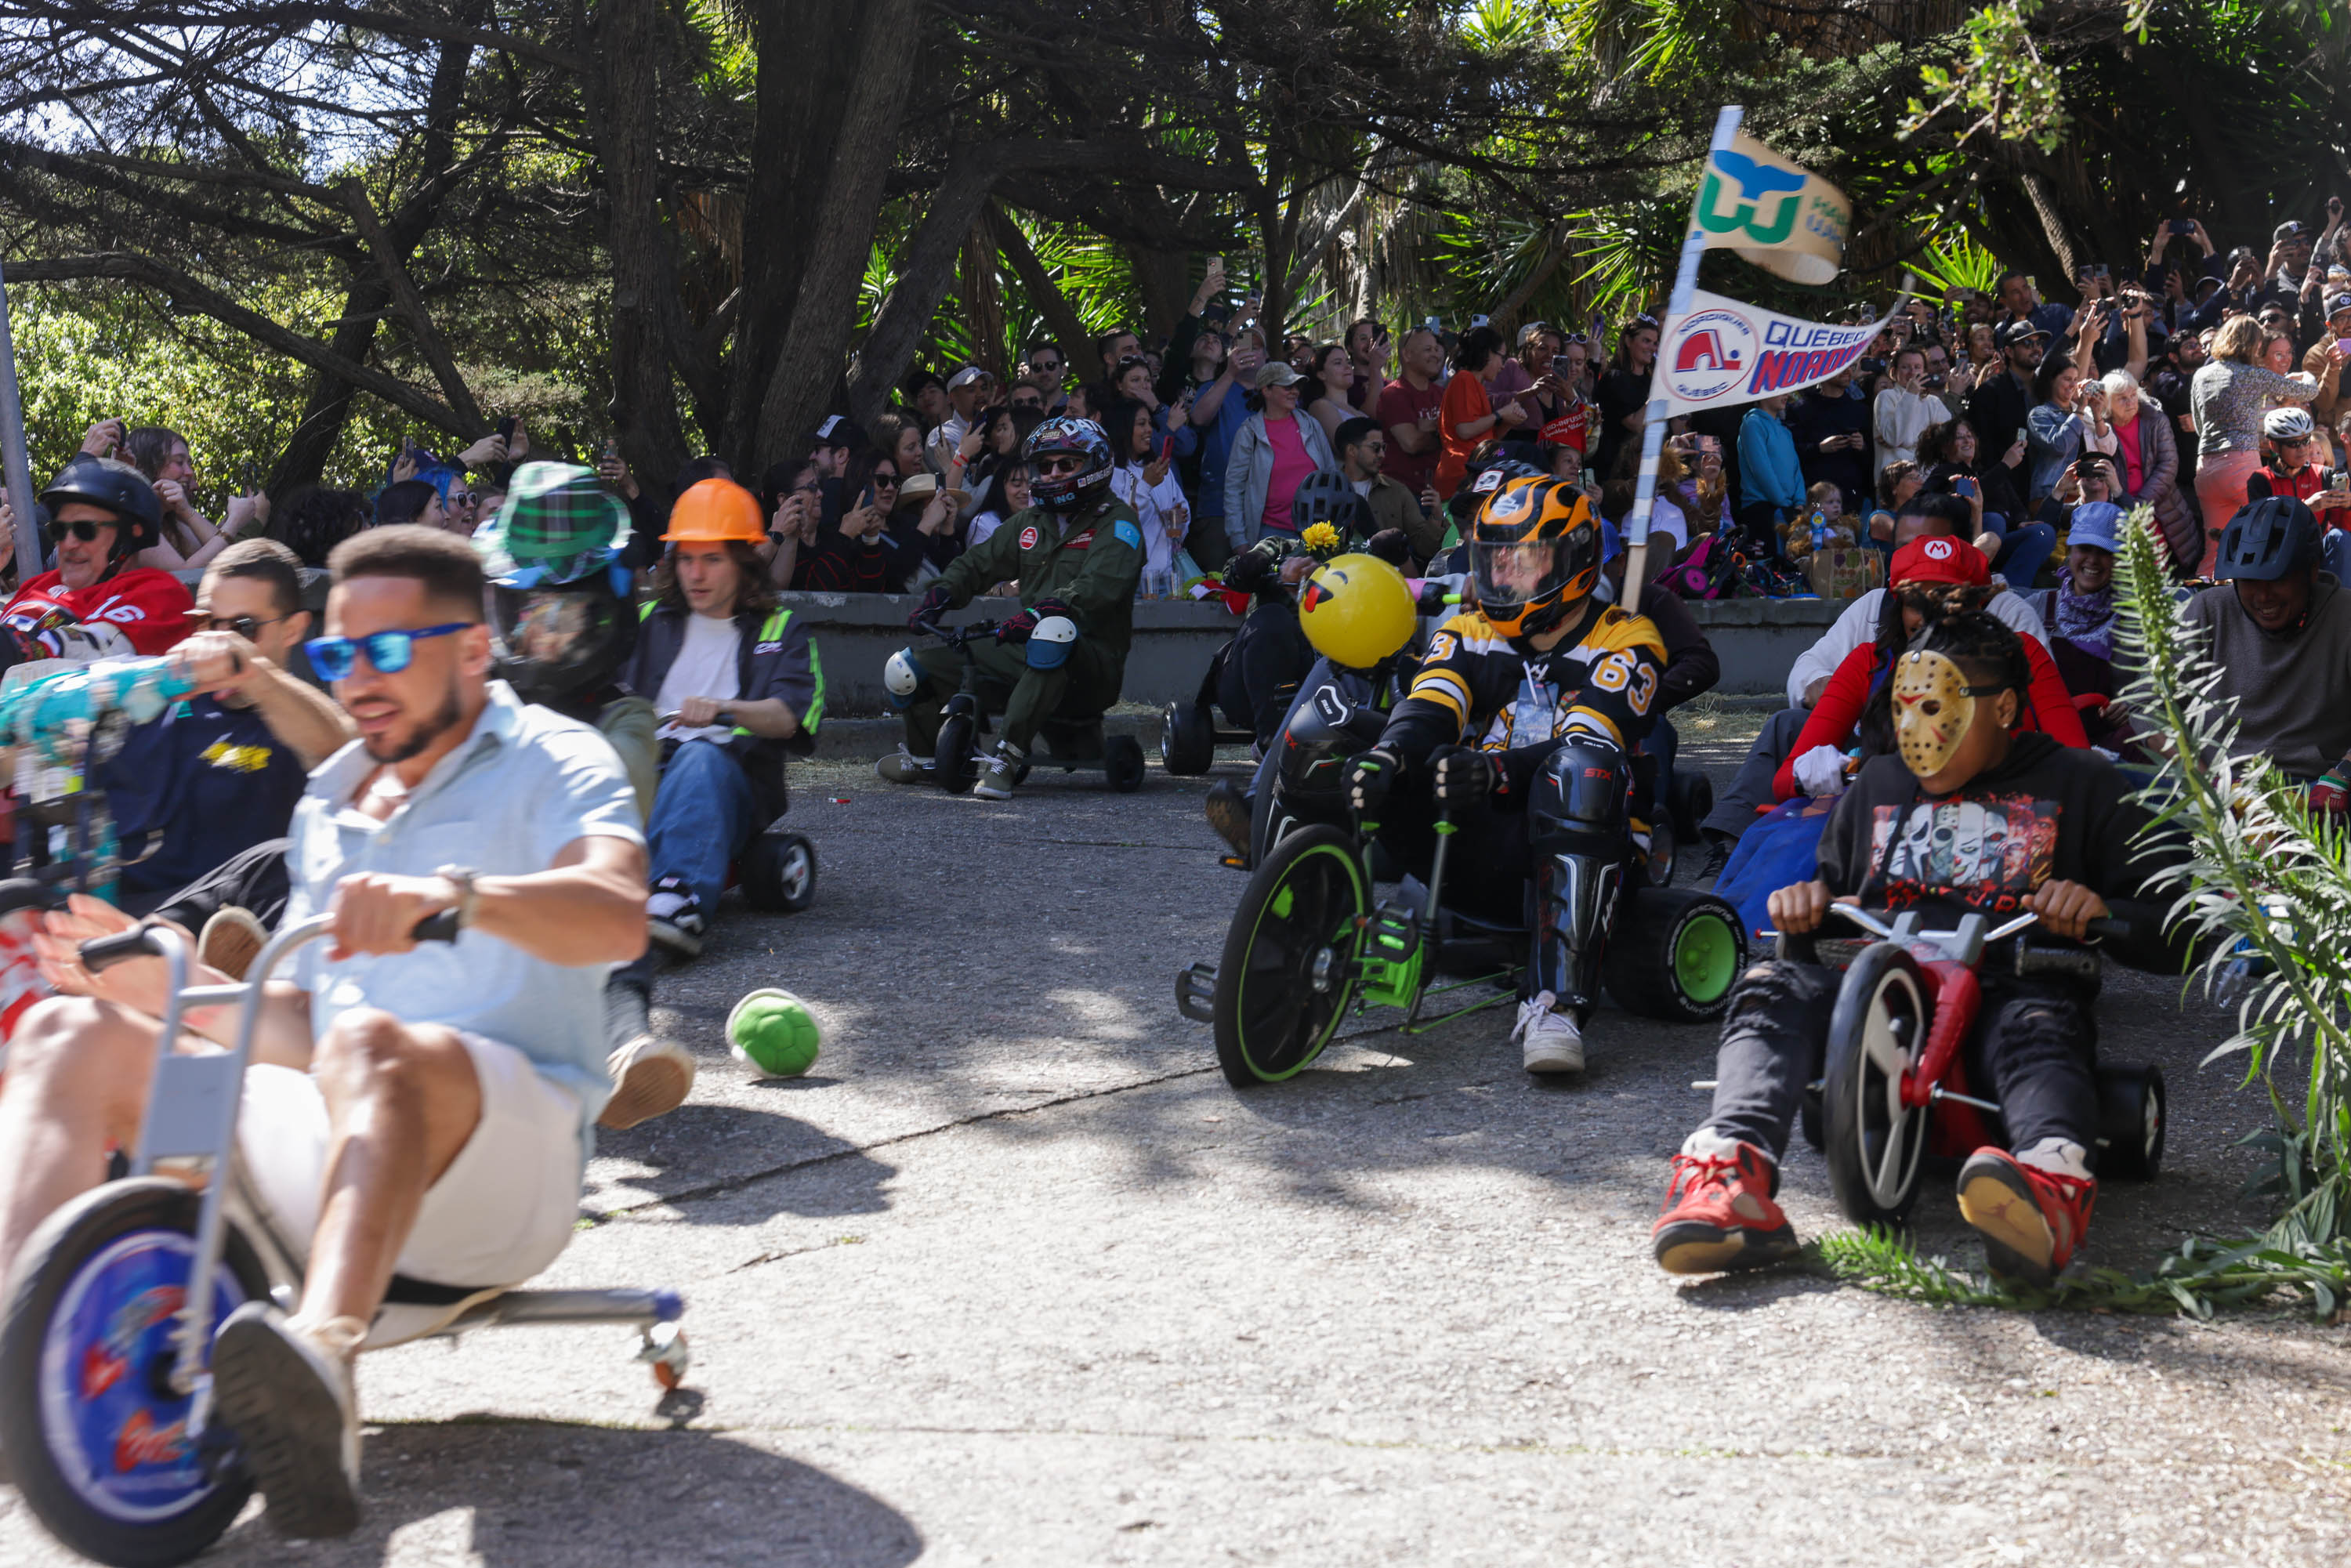 Participants in homemade carts race downhill as a crowd watches. Some wear costumes and helmets, stirring excitement.